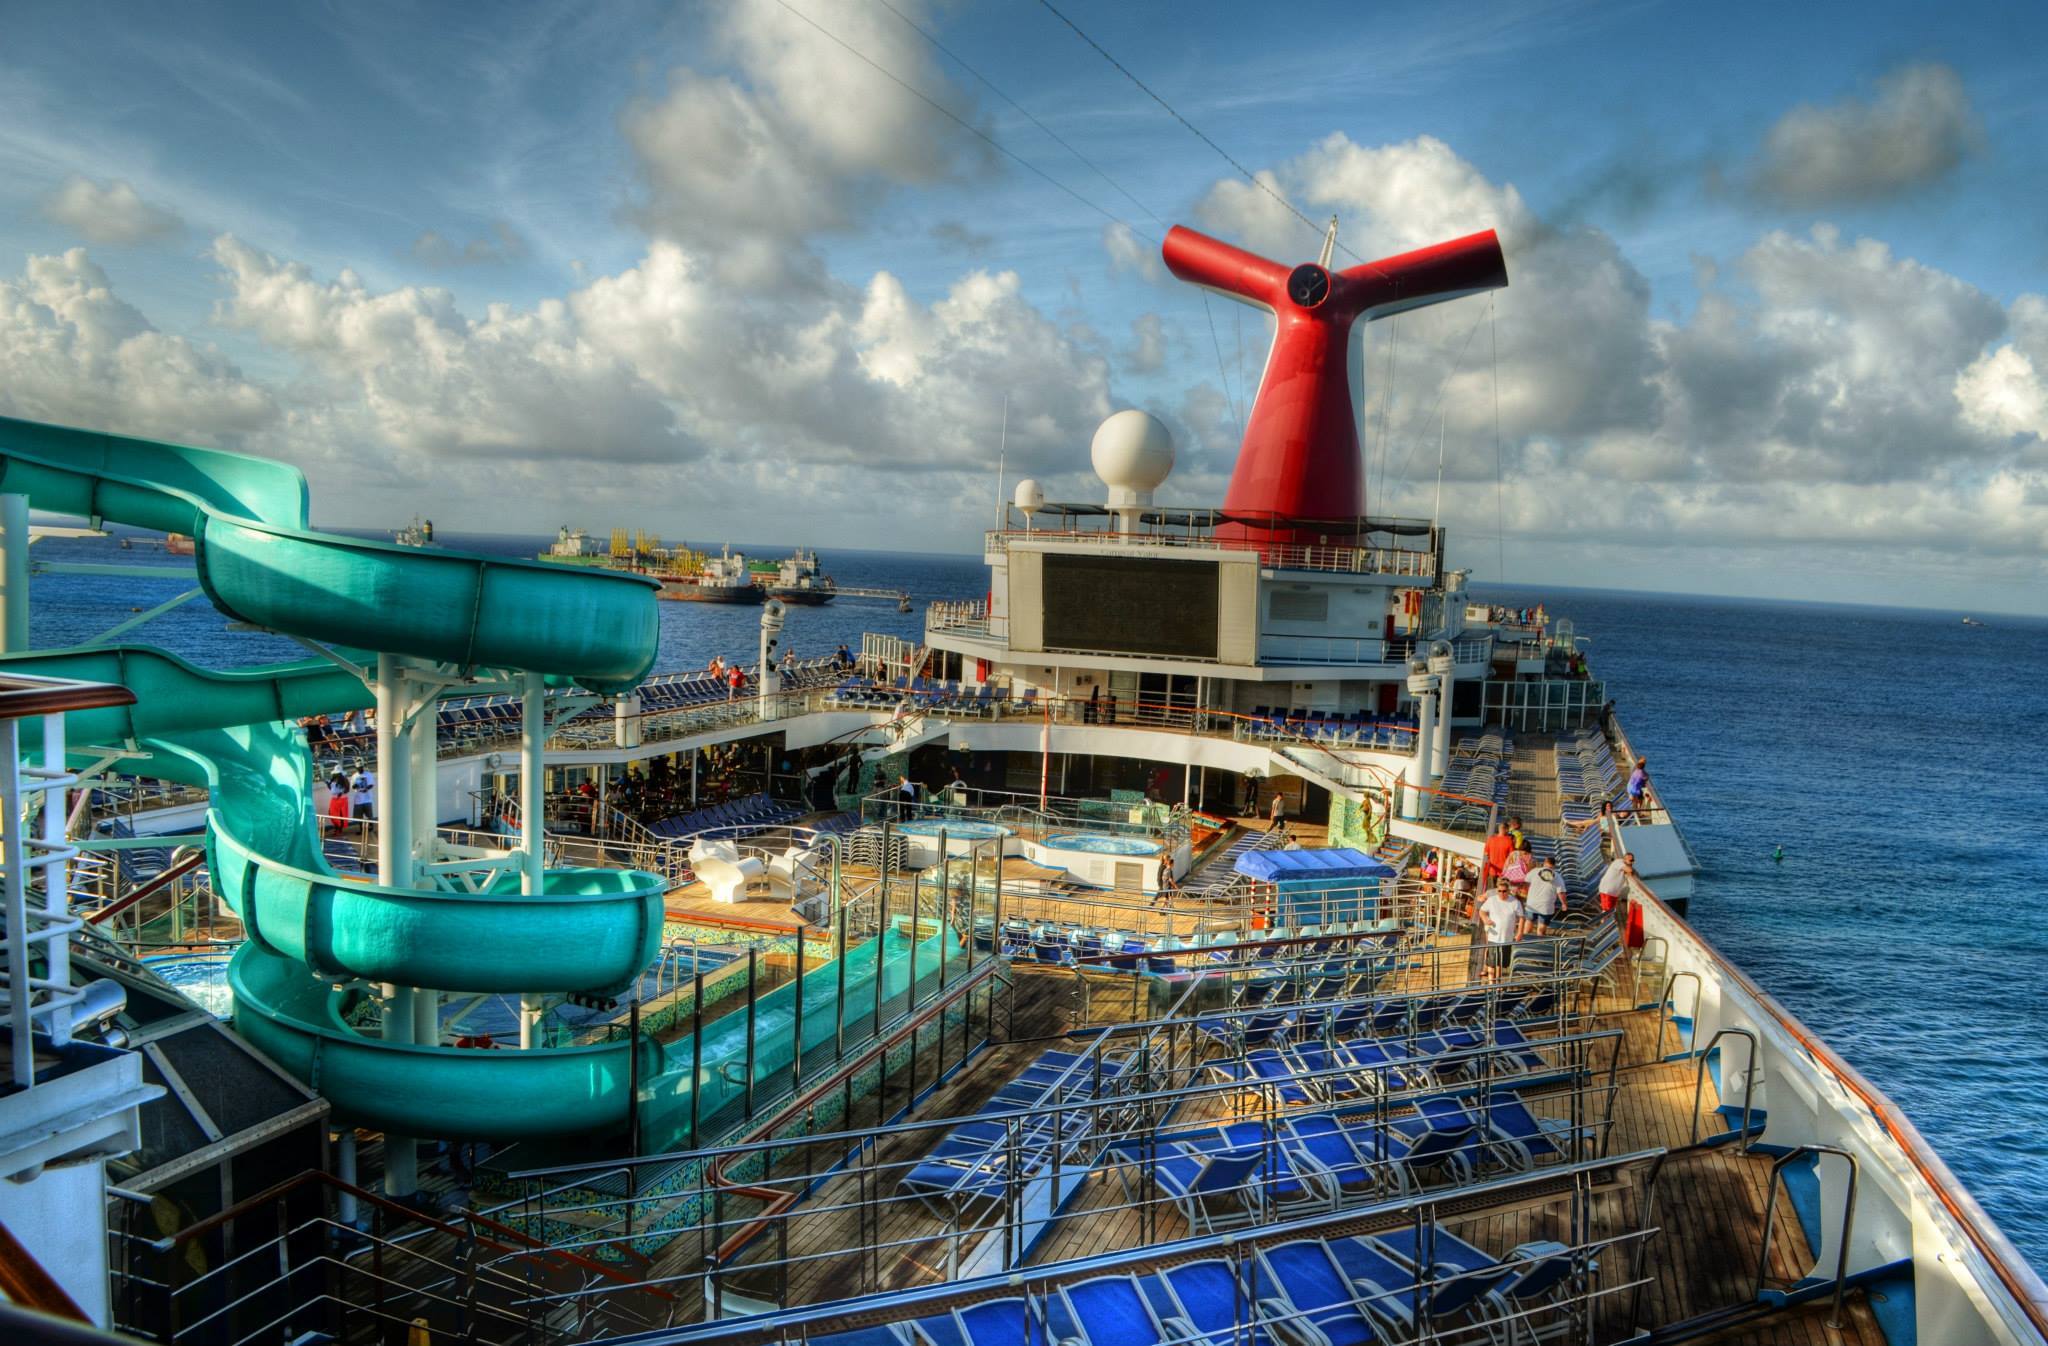 carnival cruise ship valor pictures